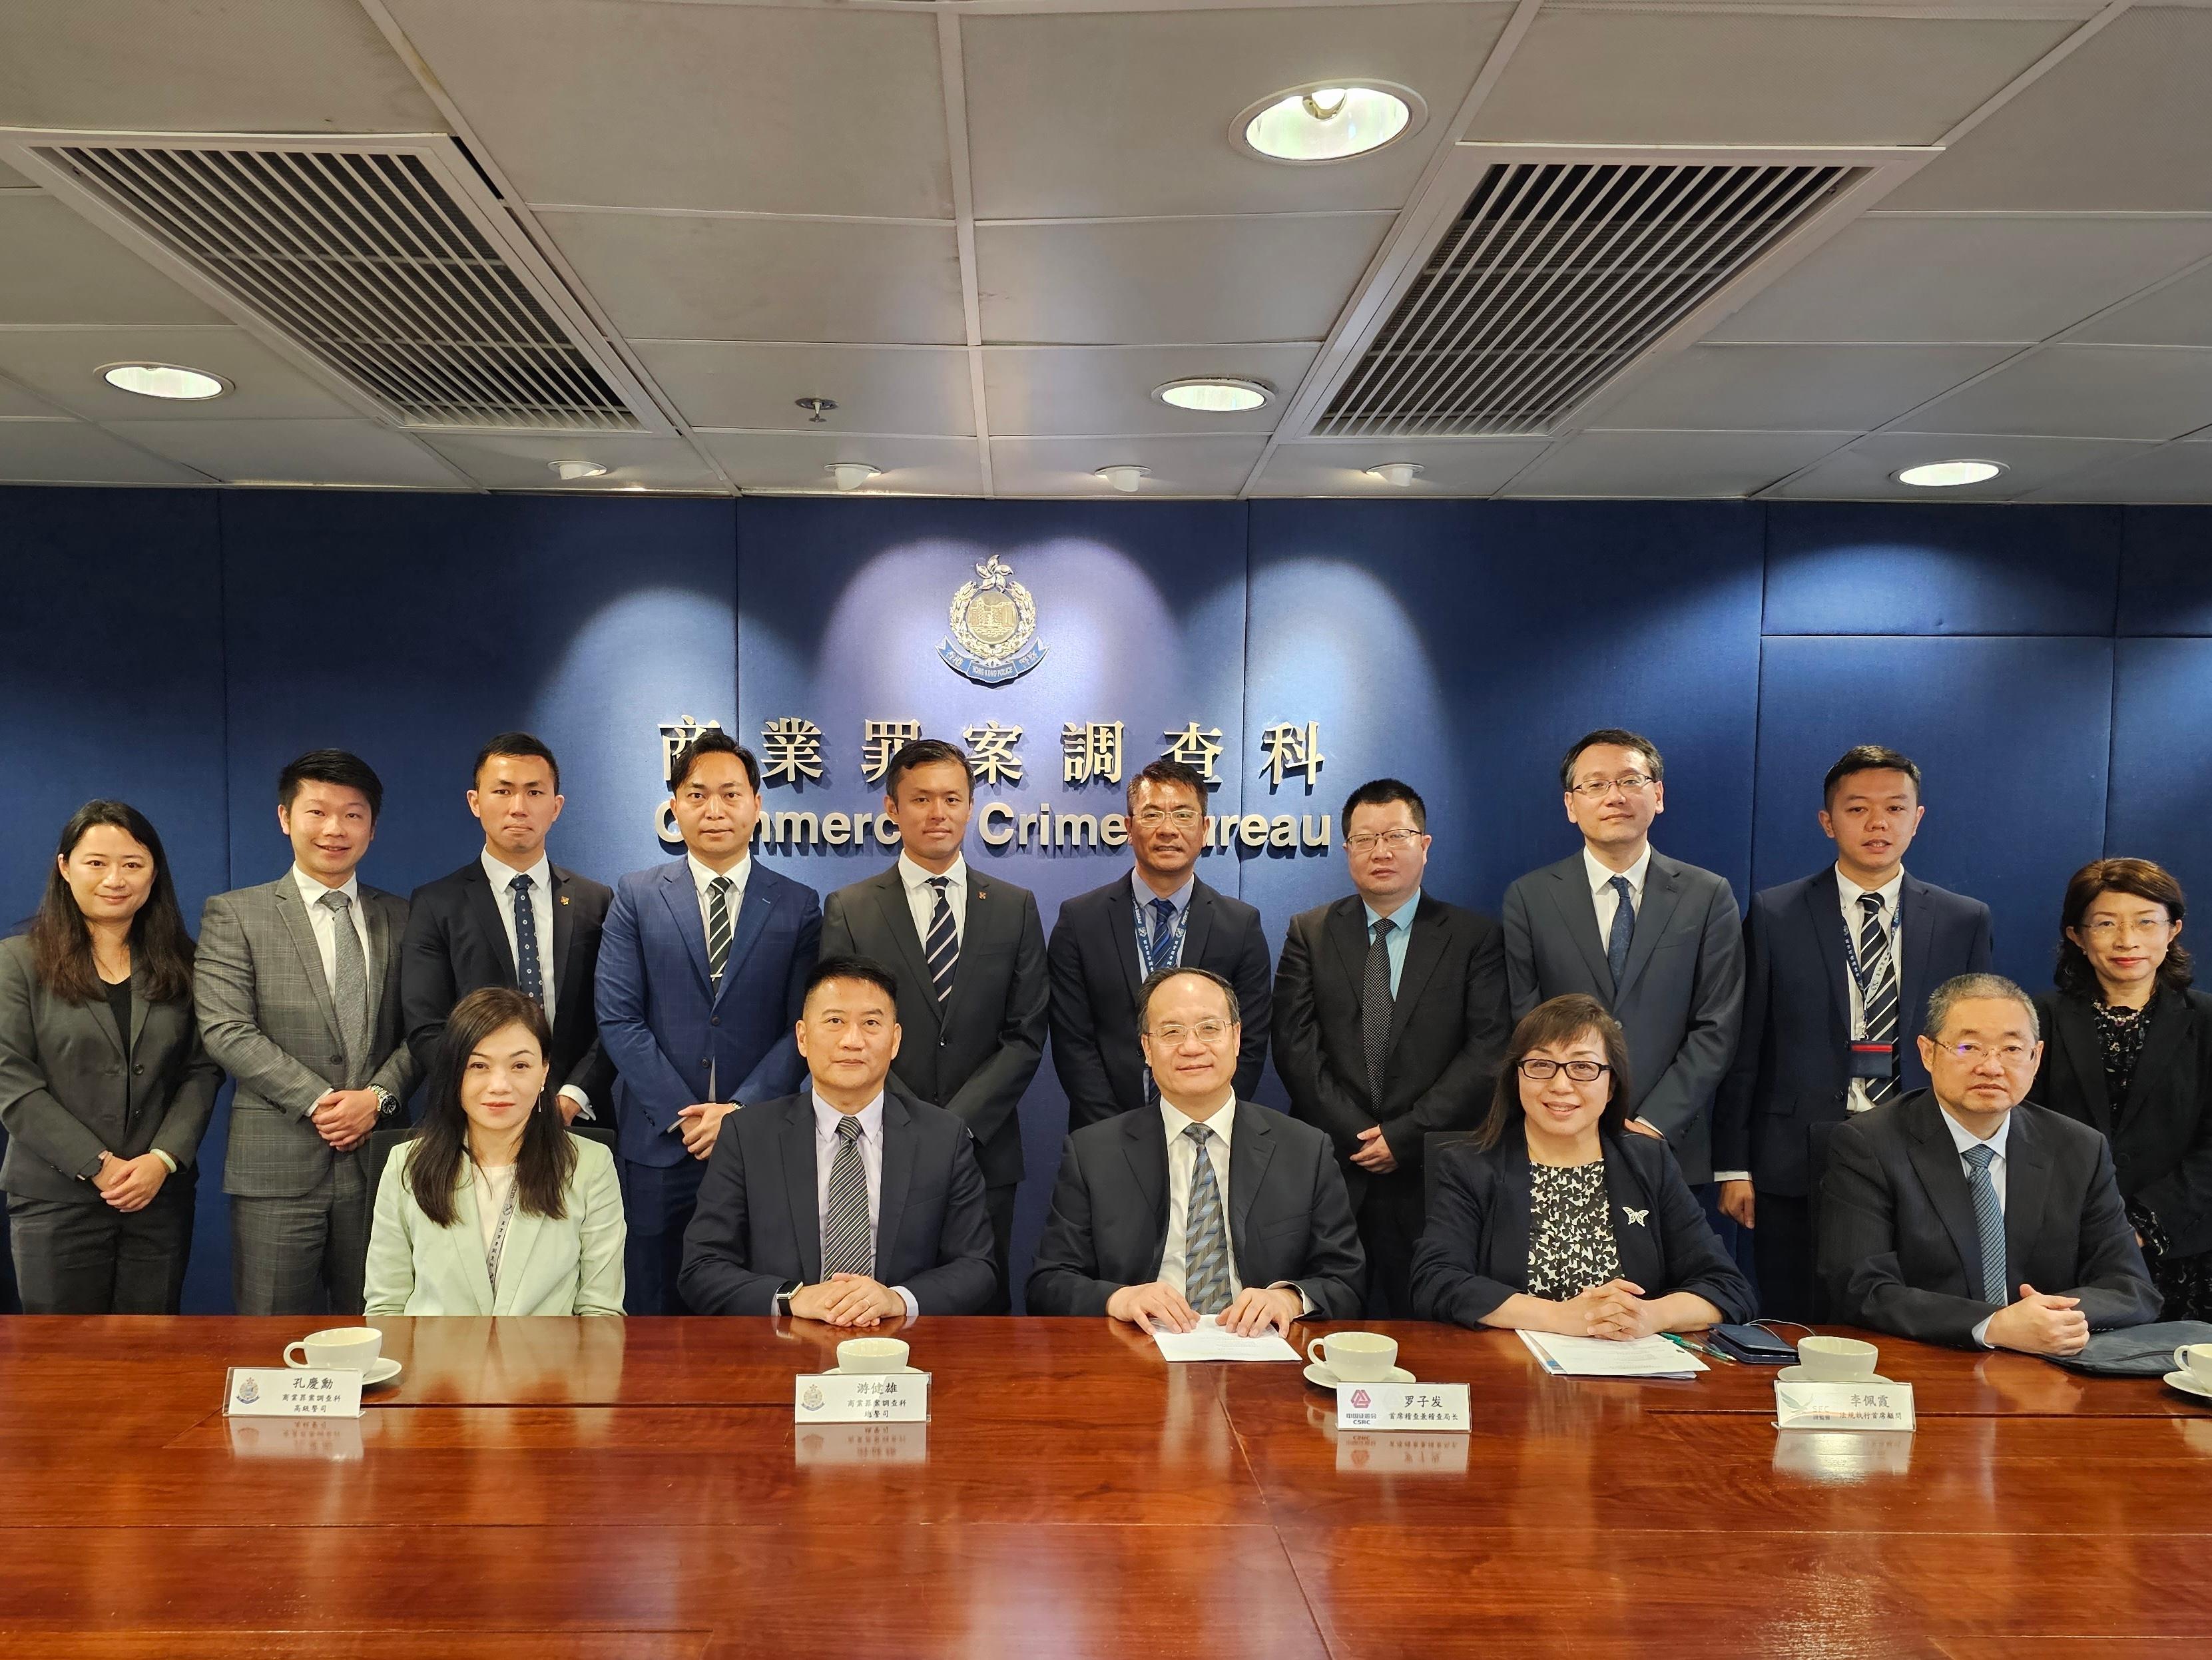 Representatives of China Securities Regulatory Commission (CSRC) and Securities and Futures Commission (SFC) held an exchange session with officers of the Commercial Crime Bureau (CCB) of the Hong Kong Police Force (HKPF). Attendees included Chief Enforcement Officer cum Director-General of the Enforcement Bureau of the CSRC, Mr Luo Zifa (front row, centre); Chief Advisor, Enforcement of SFC, Ms Li Peixia (front row, second right); Chief Superintendent, CCB of HKPF, Mr Yau Kin-hung (front row, second left); and Senior Superintendent, CCB of HKPF, Ms Kung Hing-fun (front row, first left).